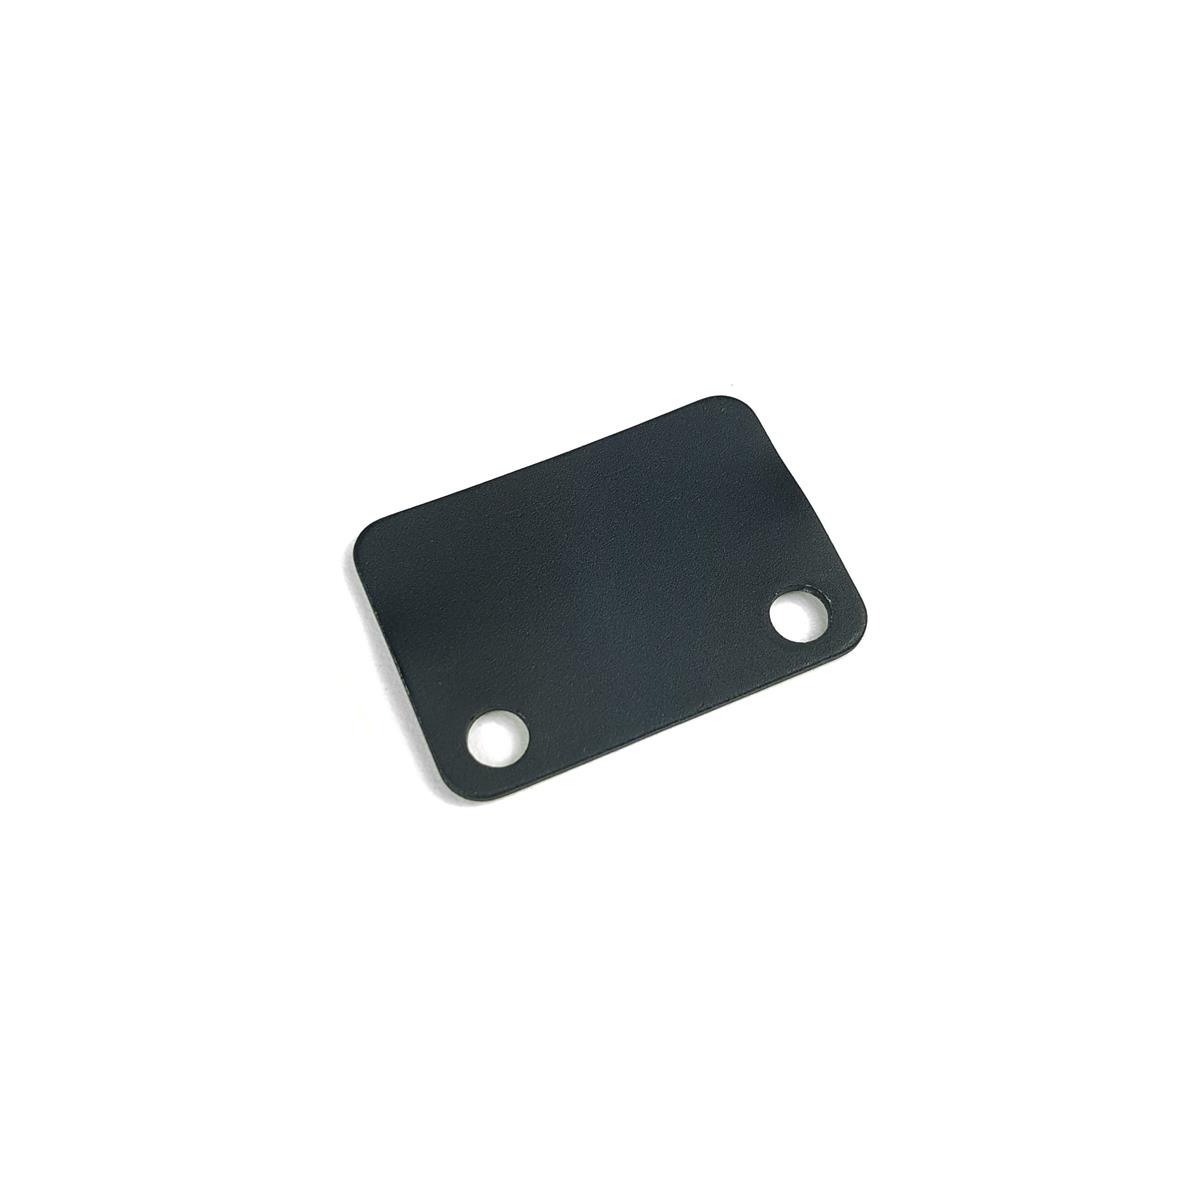 Battery cover fixing plate for models from 2019